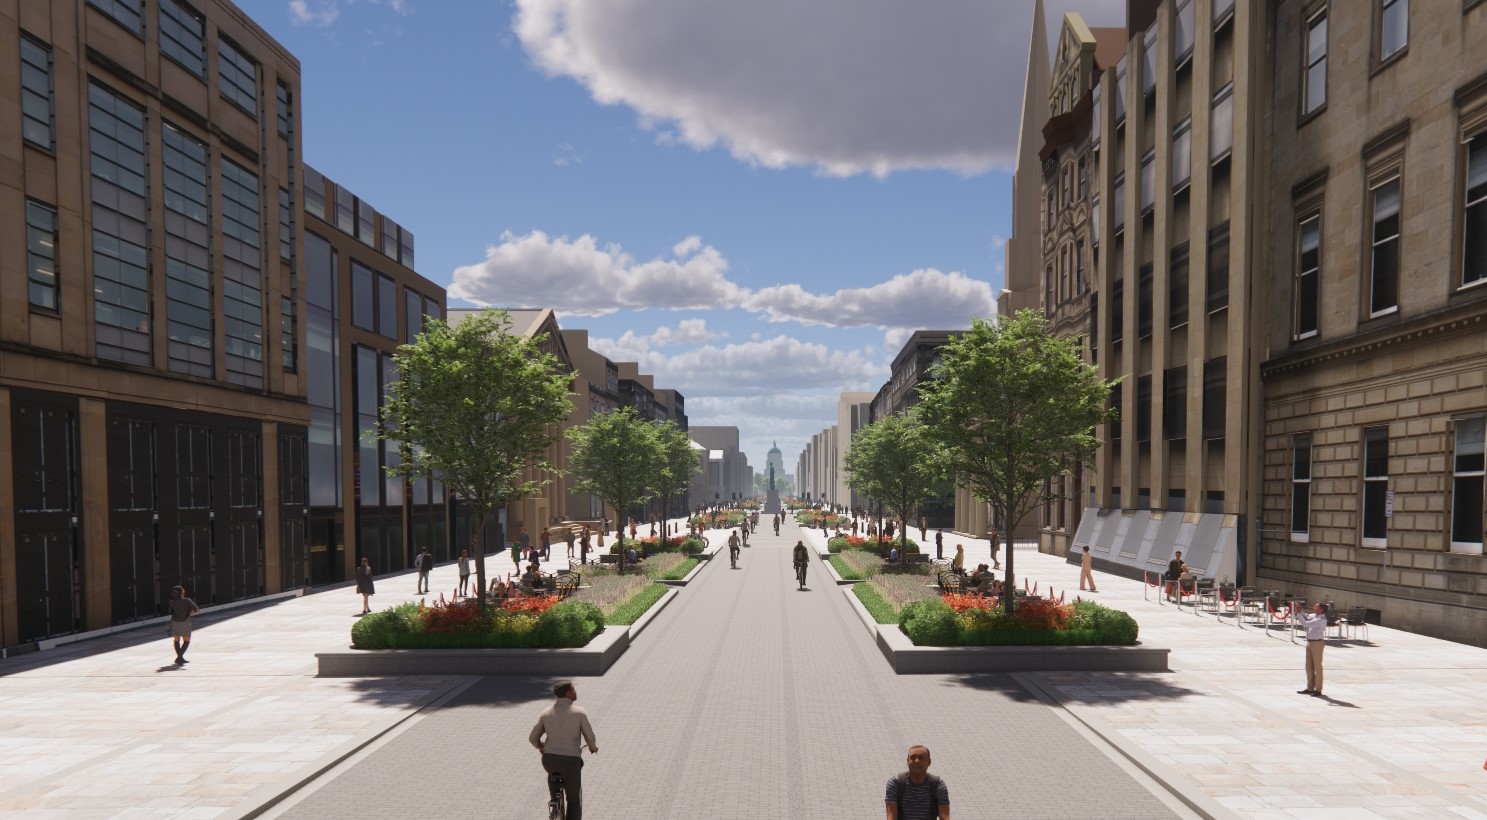 Edinburgh unveils updated George Street and First New Town project designs